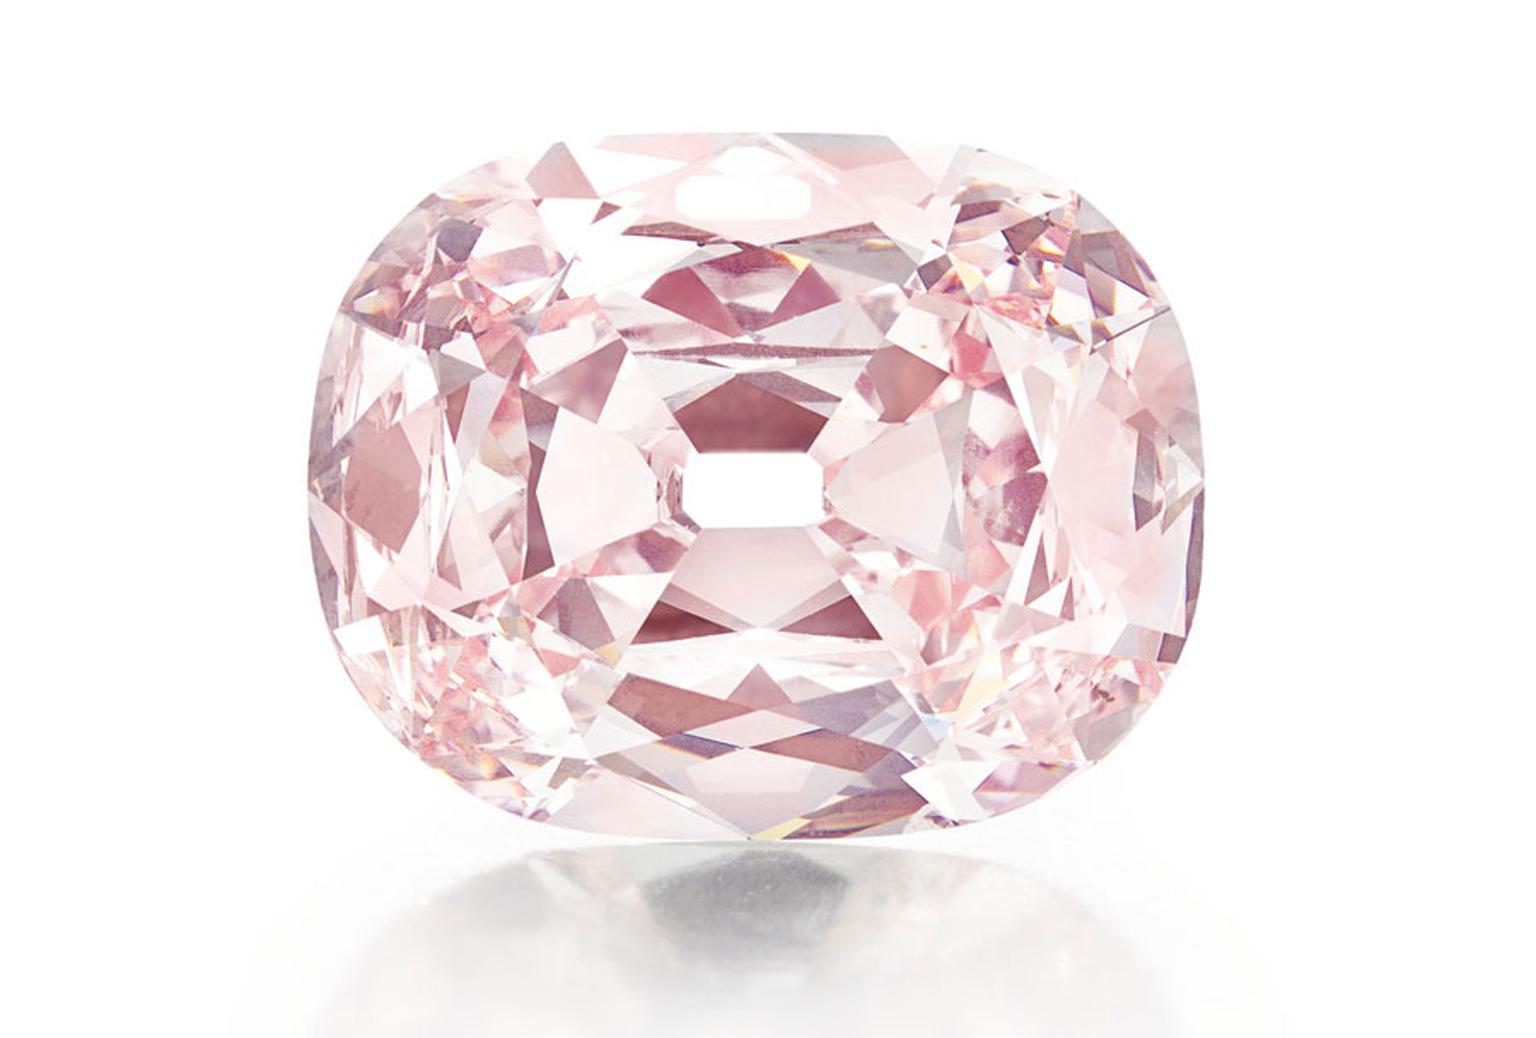 The 'Princie' pink diamond, a rare 34.65 carat pink diamond, was sold to an anonymous buyer for $39.3 million at Christie's New York in April 2013 - the highest price ever paid for a Golconda diamond at auction.